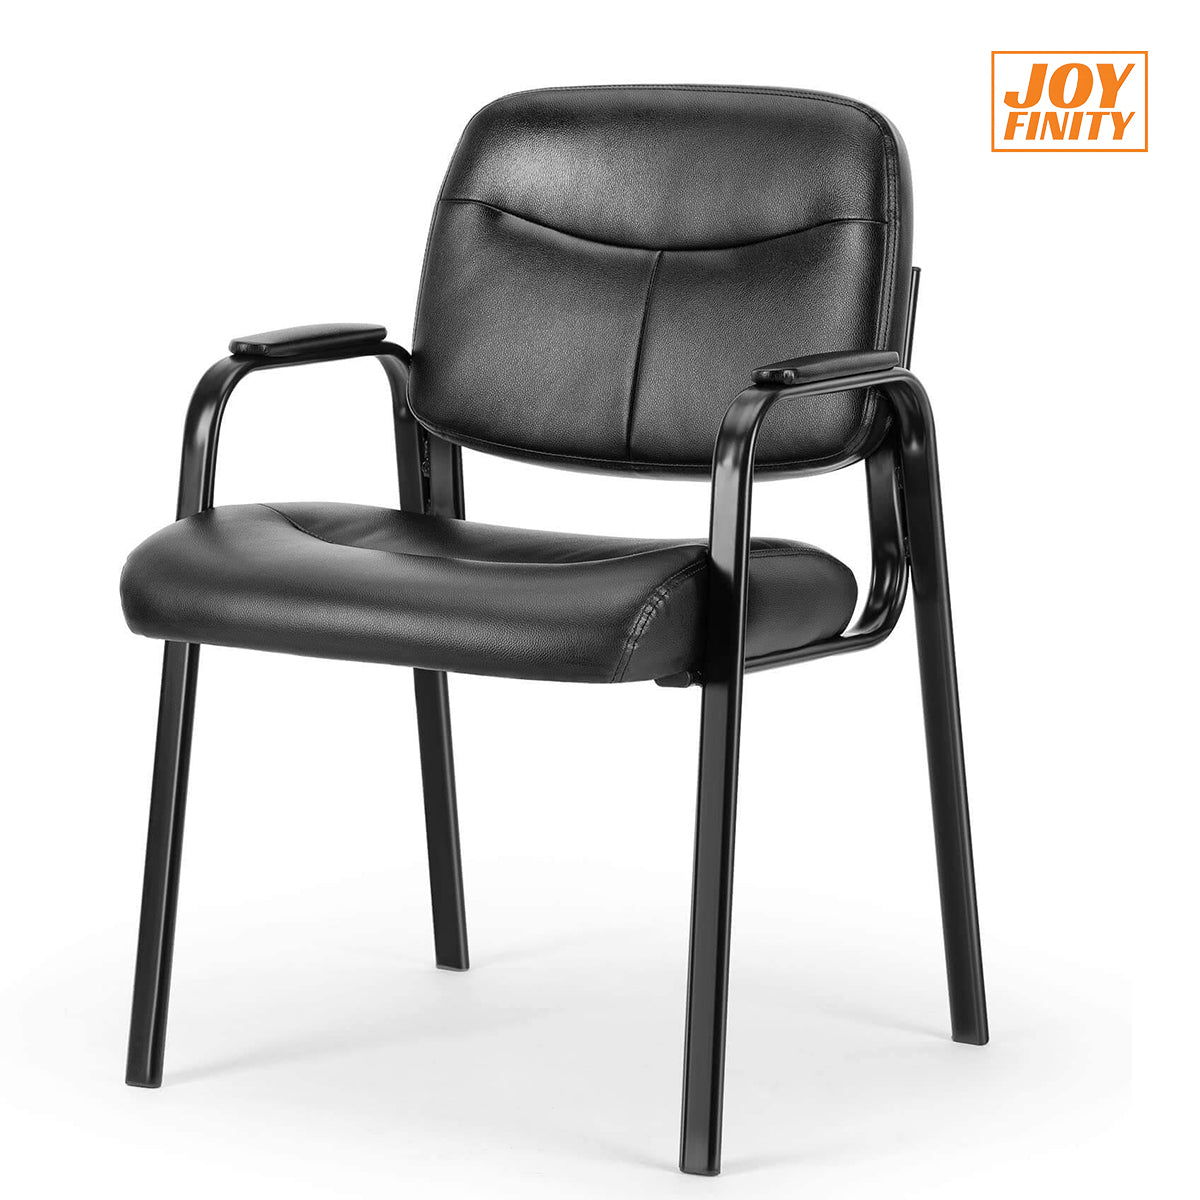 JOYFINITY Leather Conference Room Chairs with Padded Arms,eception Cha